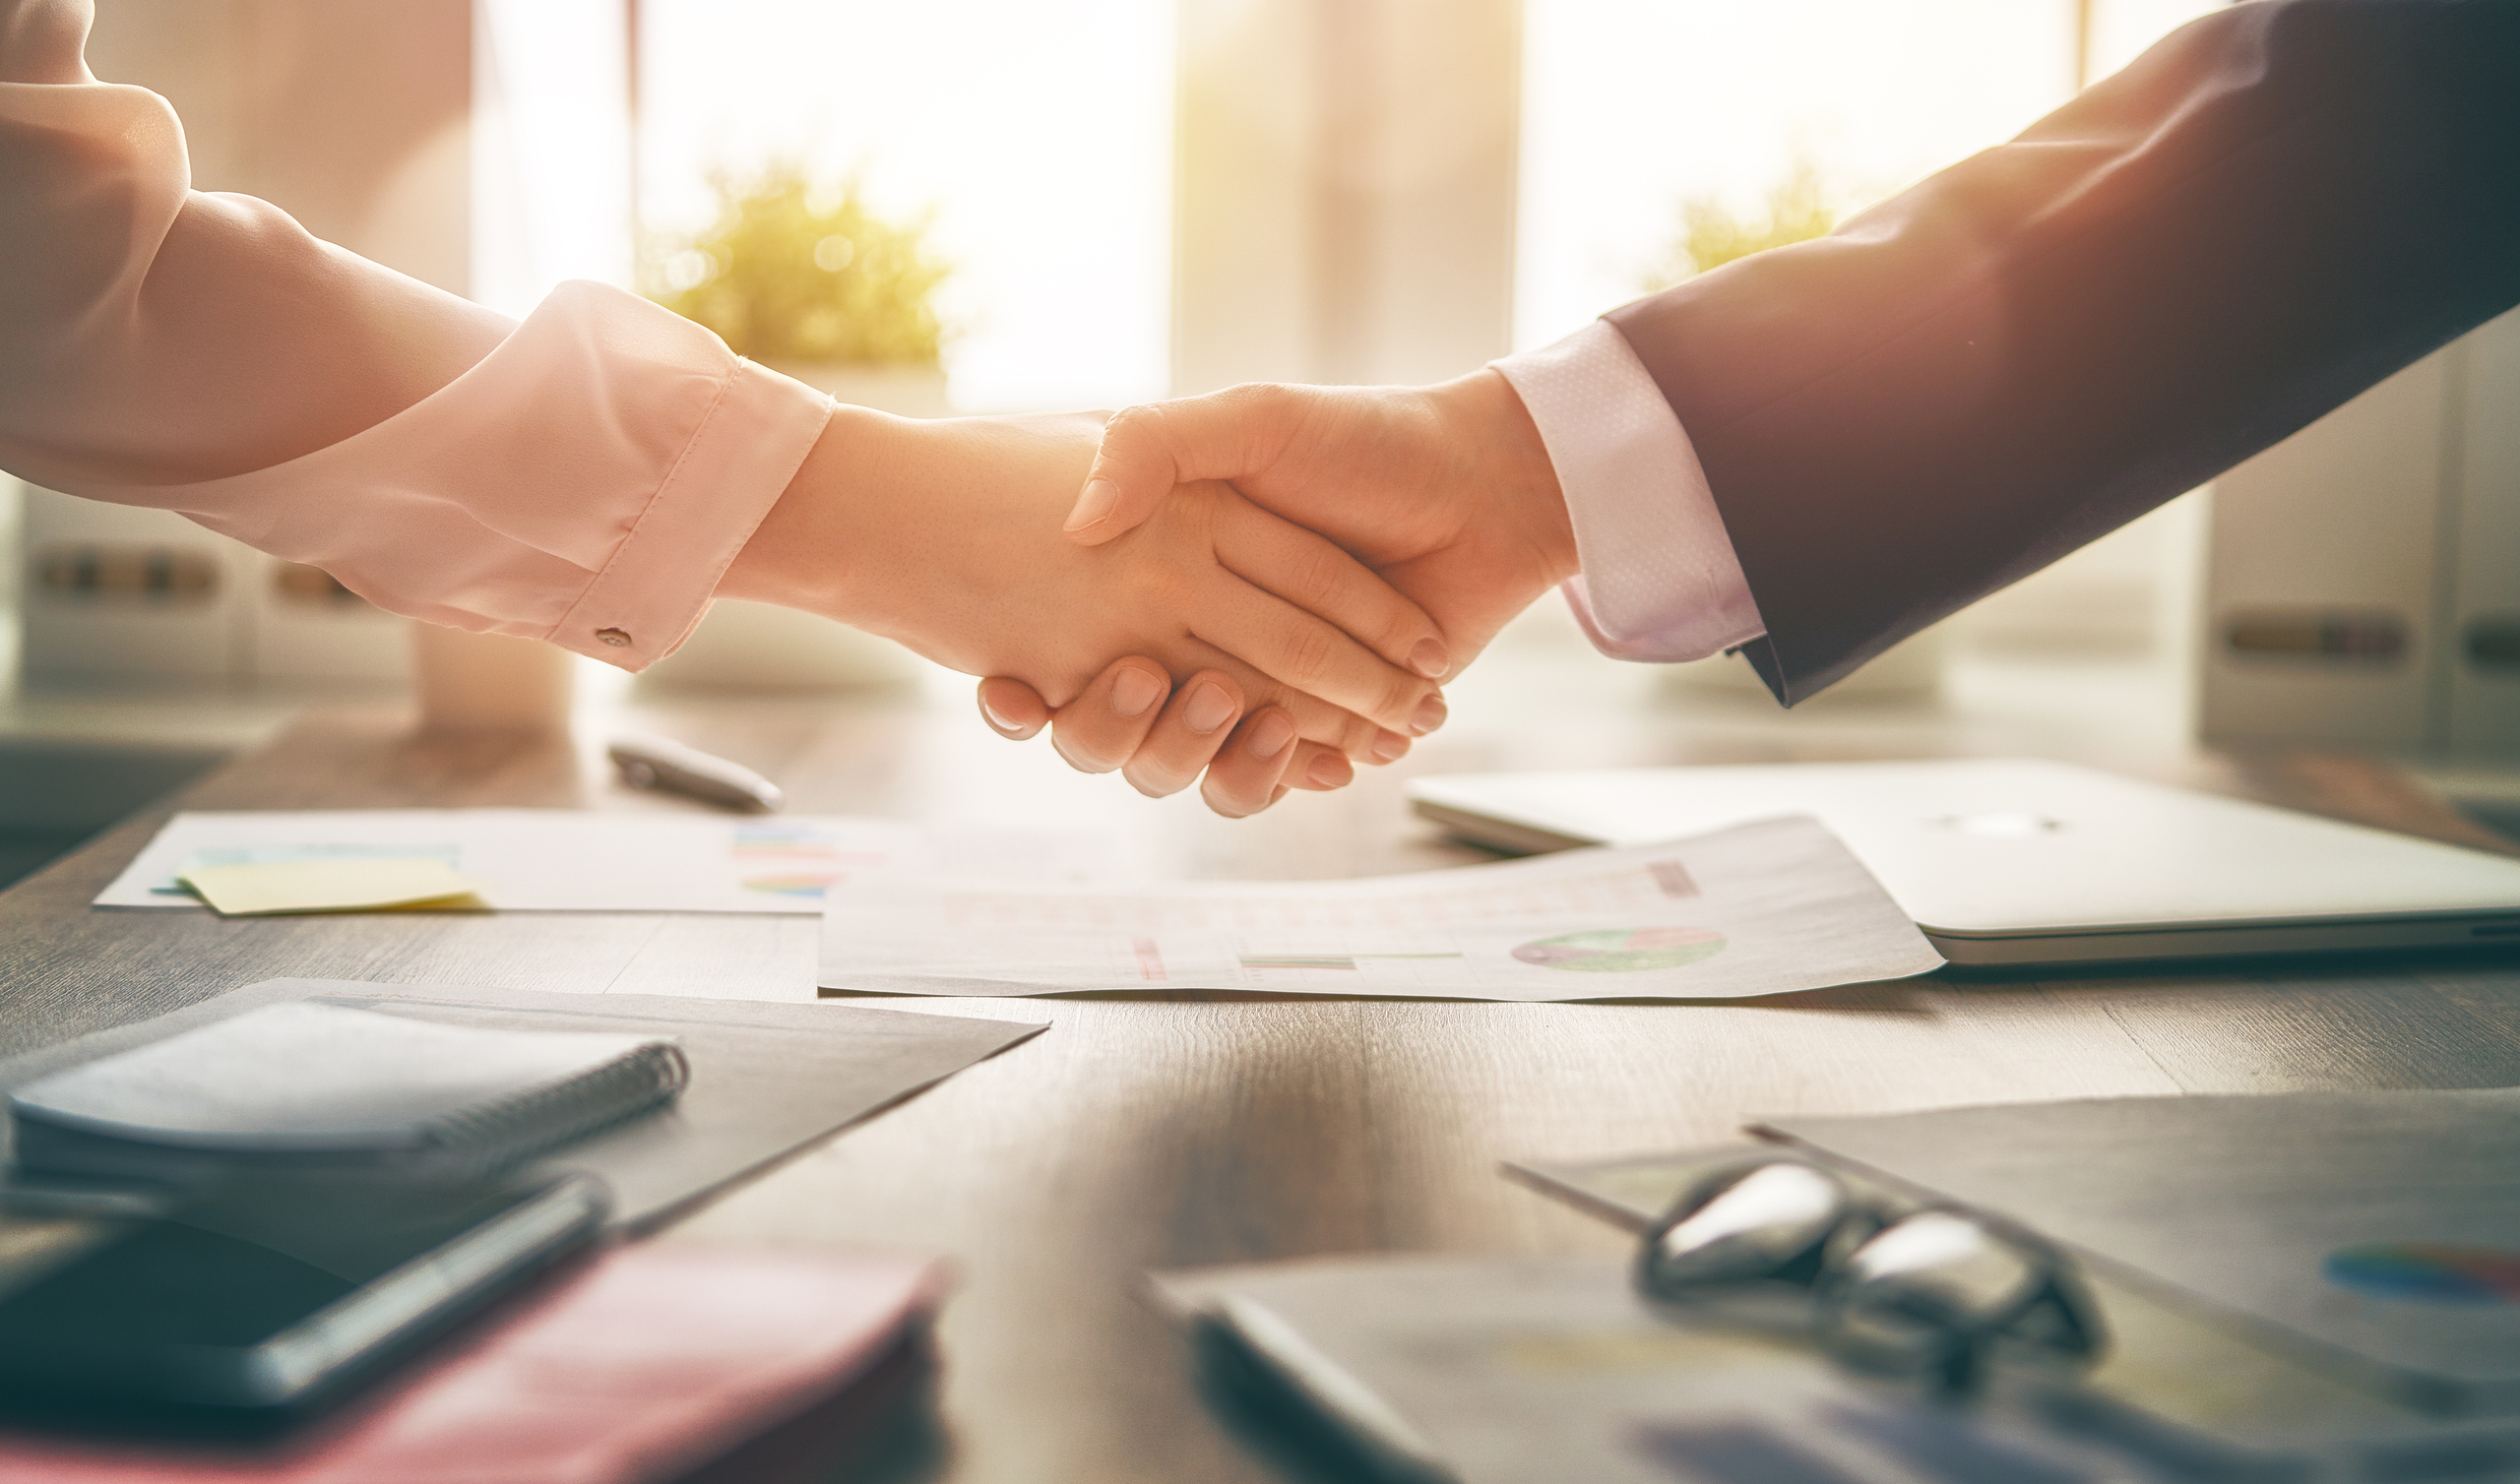 Image of a sunny handshake between two business people over a desk with papers and a pen.